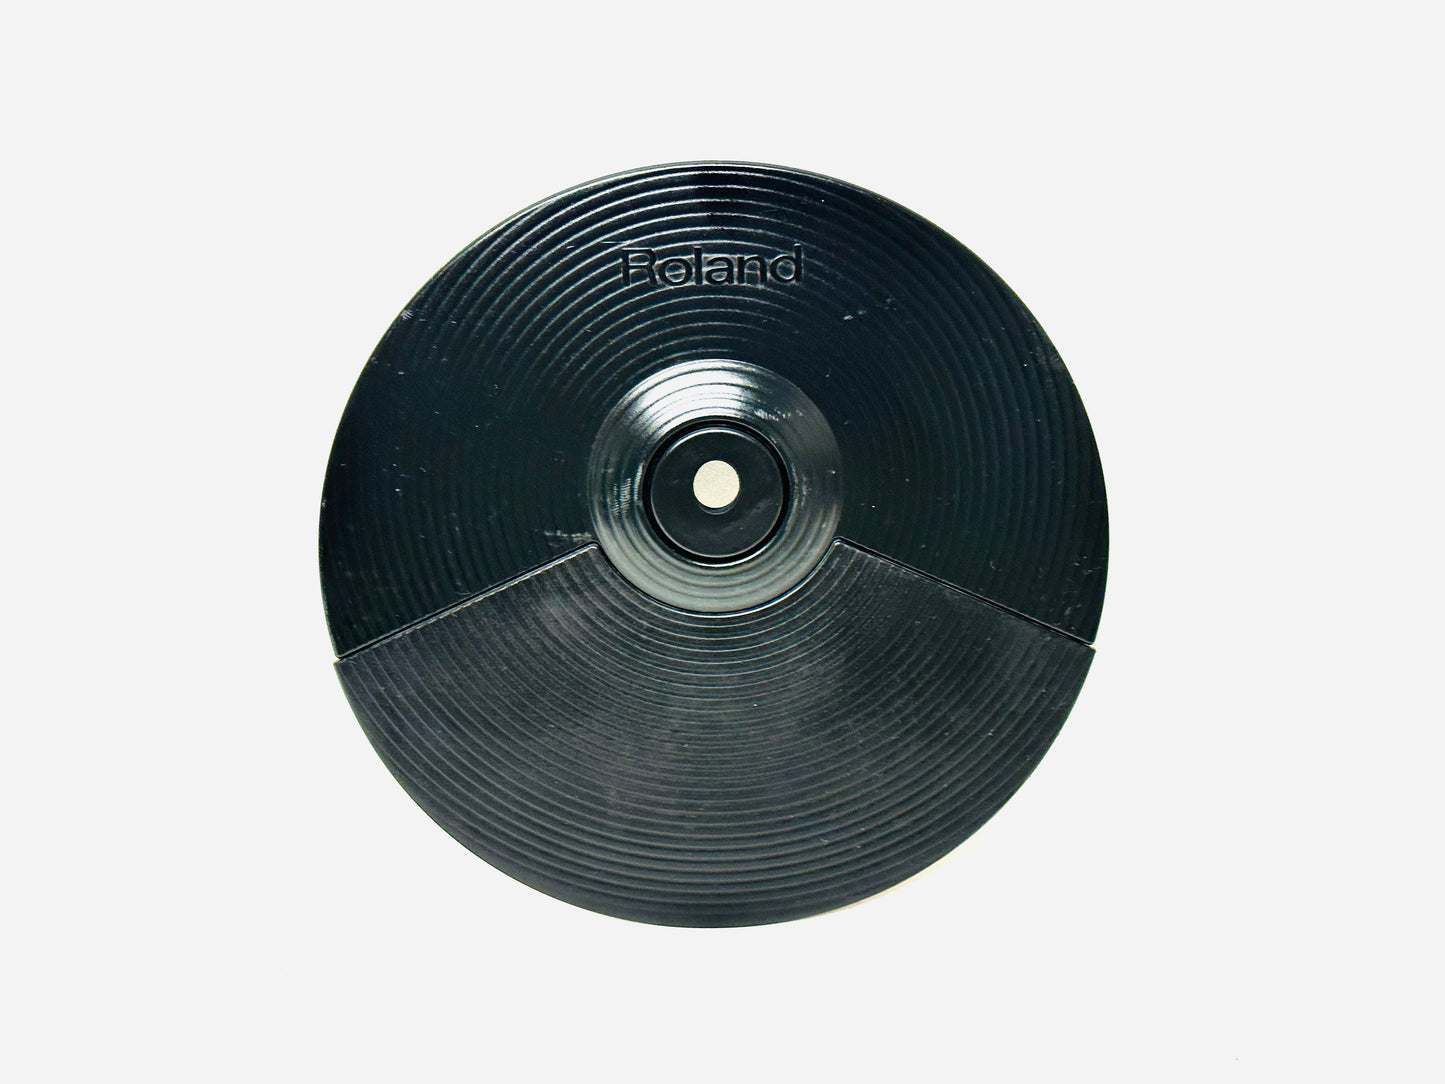 Pair CY-5’s 10” cymbals